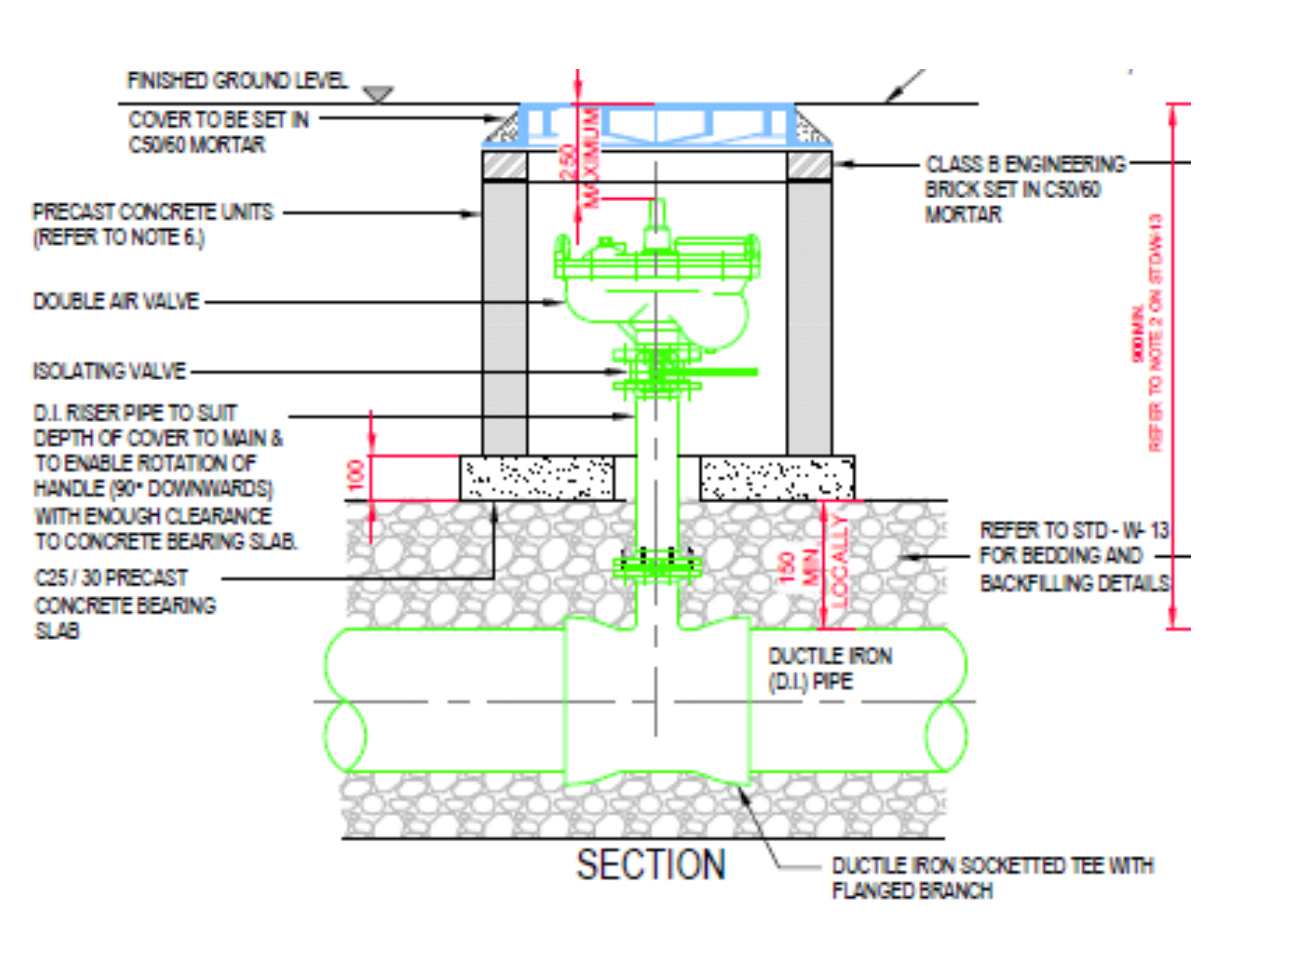 Diagram HIW6 - Typical air valve arrangement- Extract from Irish Water